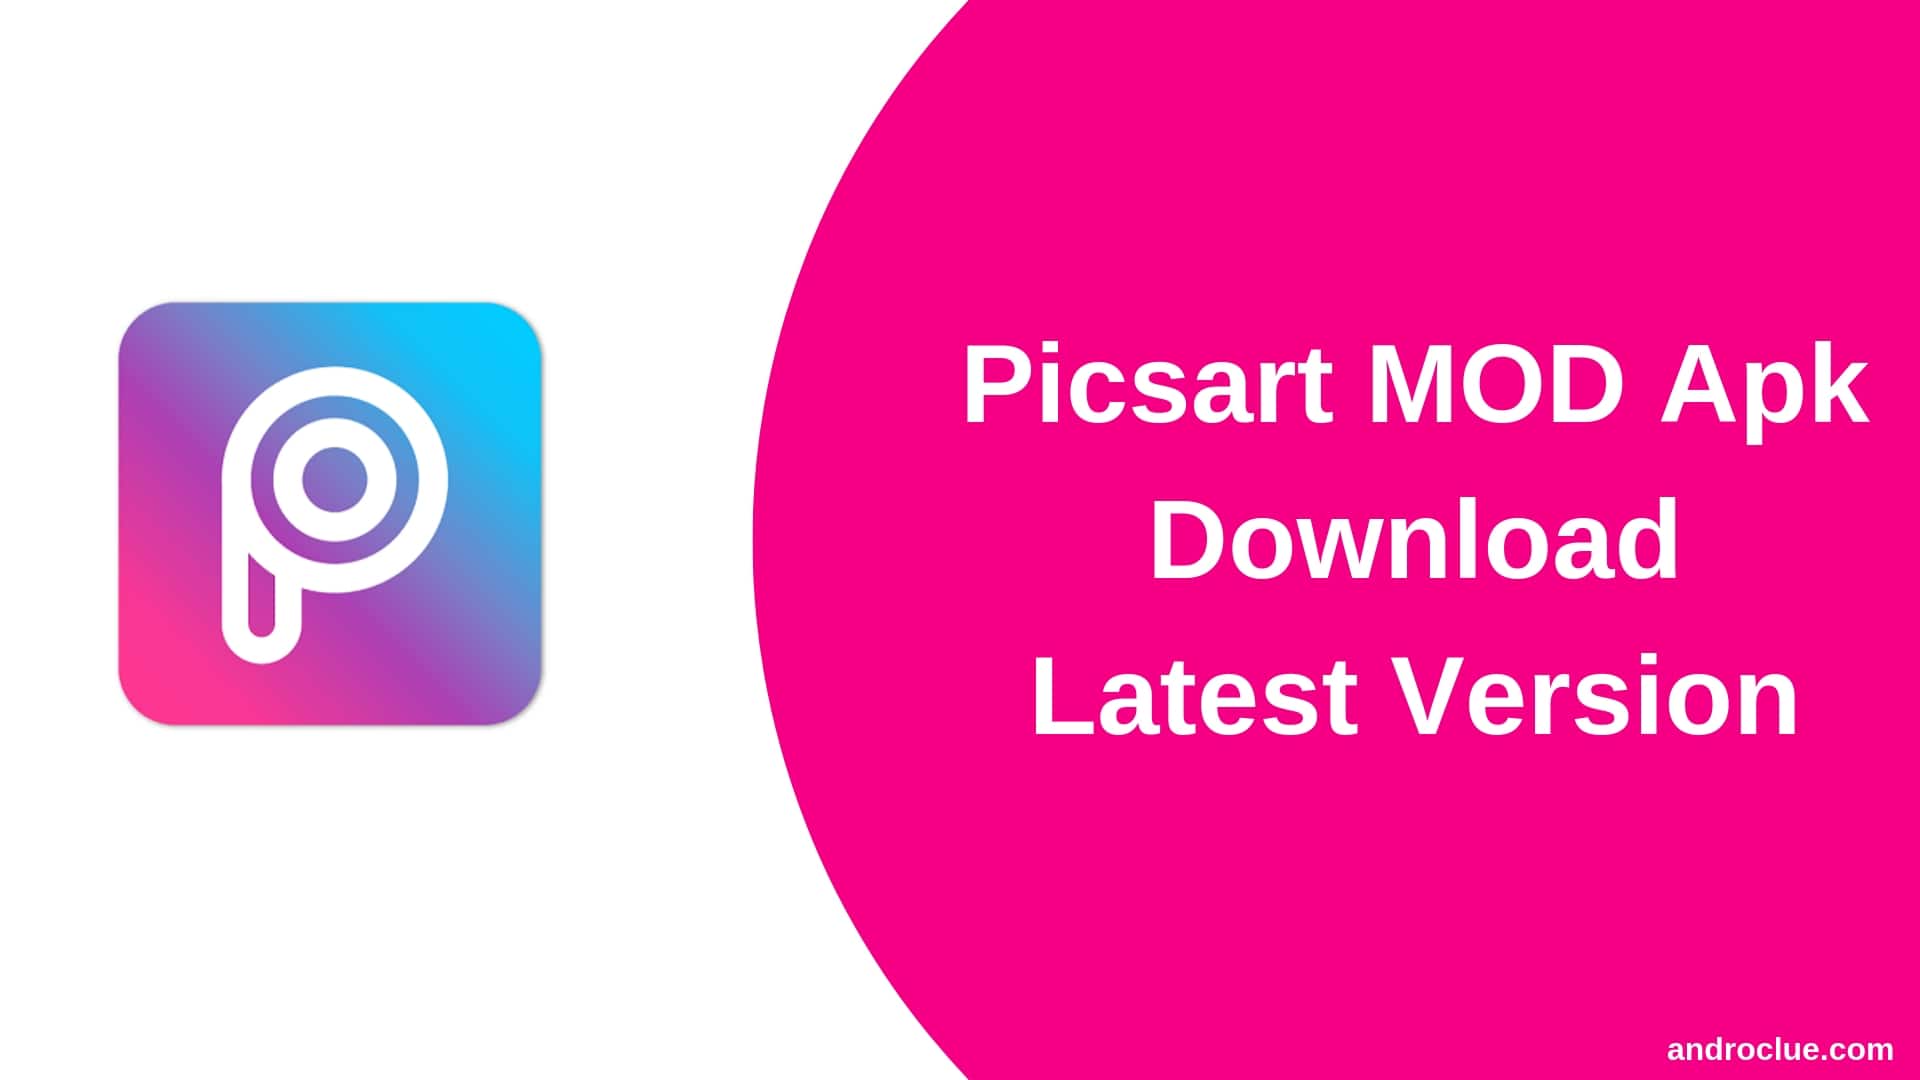 PicsArt MOD Apk Download Latest v13.0 for Android & PC (2019)